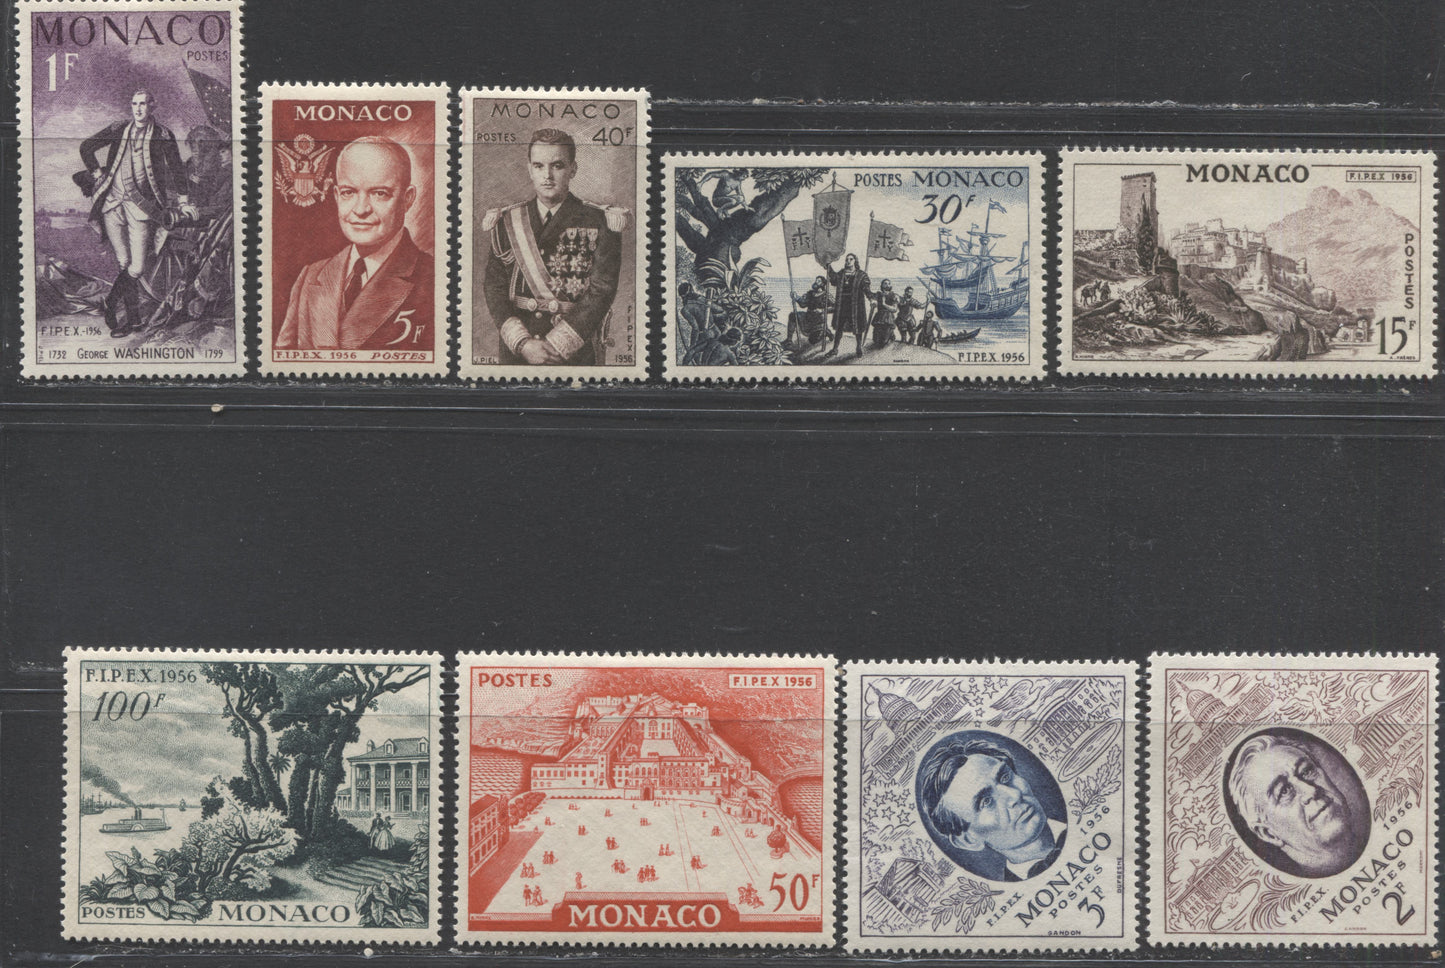 Lot 123 Monaco SC#354-362 1956 FIPEX Issue, A VFOG Range Of Singles, 2017 Scott Cat. $20 USD, Click on Listing to See ALL Pictures